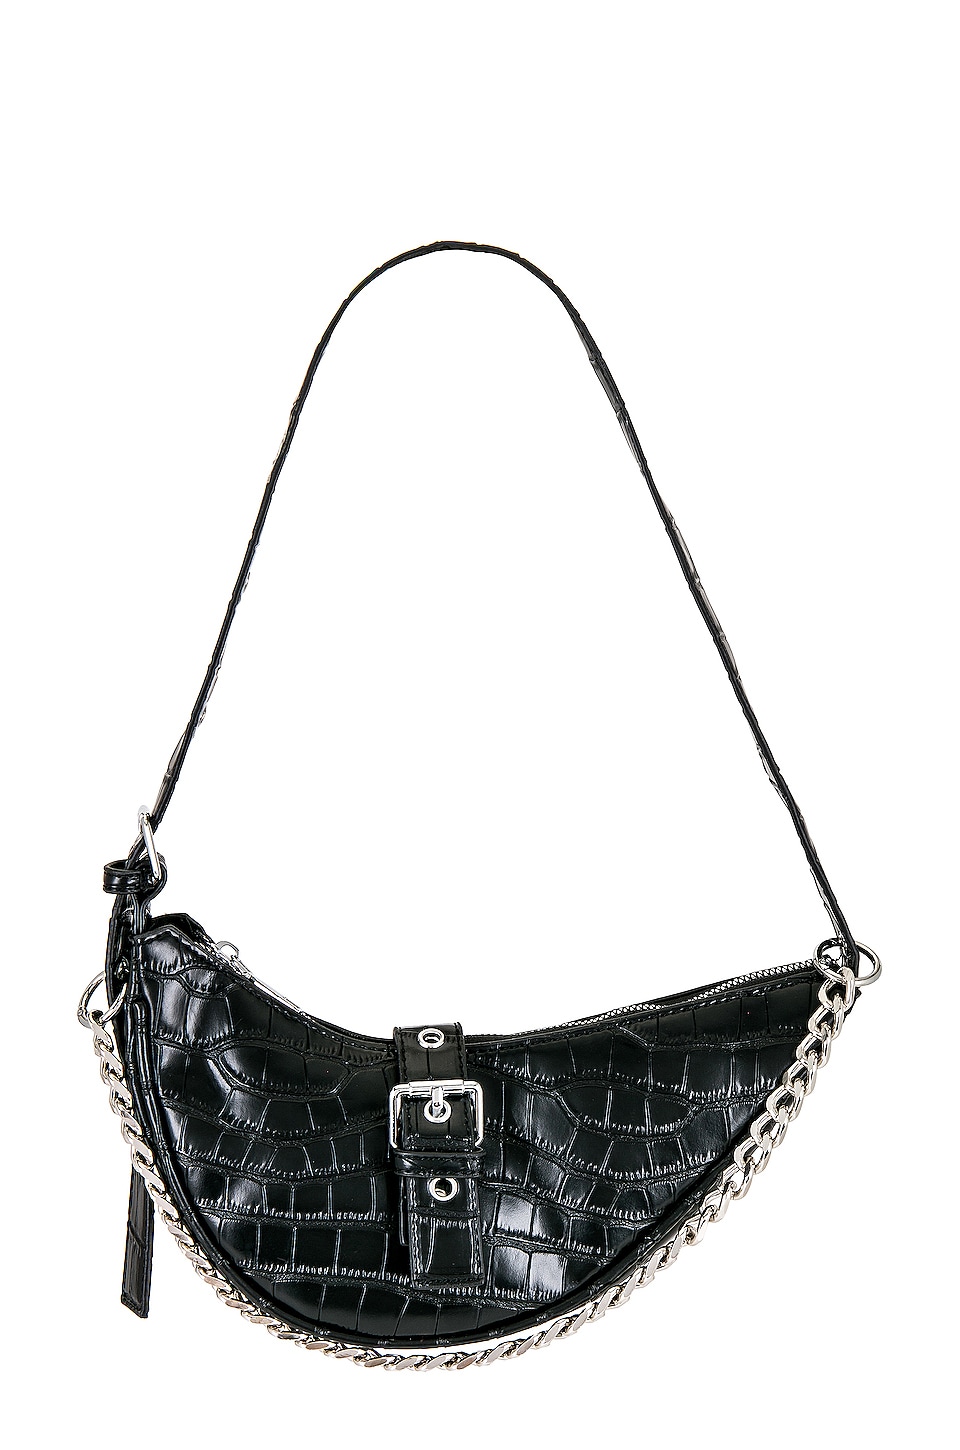 Christian Dior 'Admit It' Leather Hobo